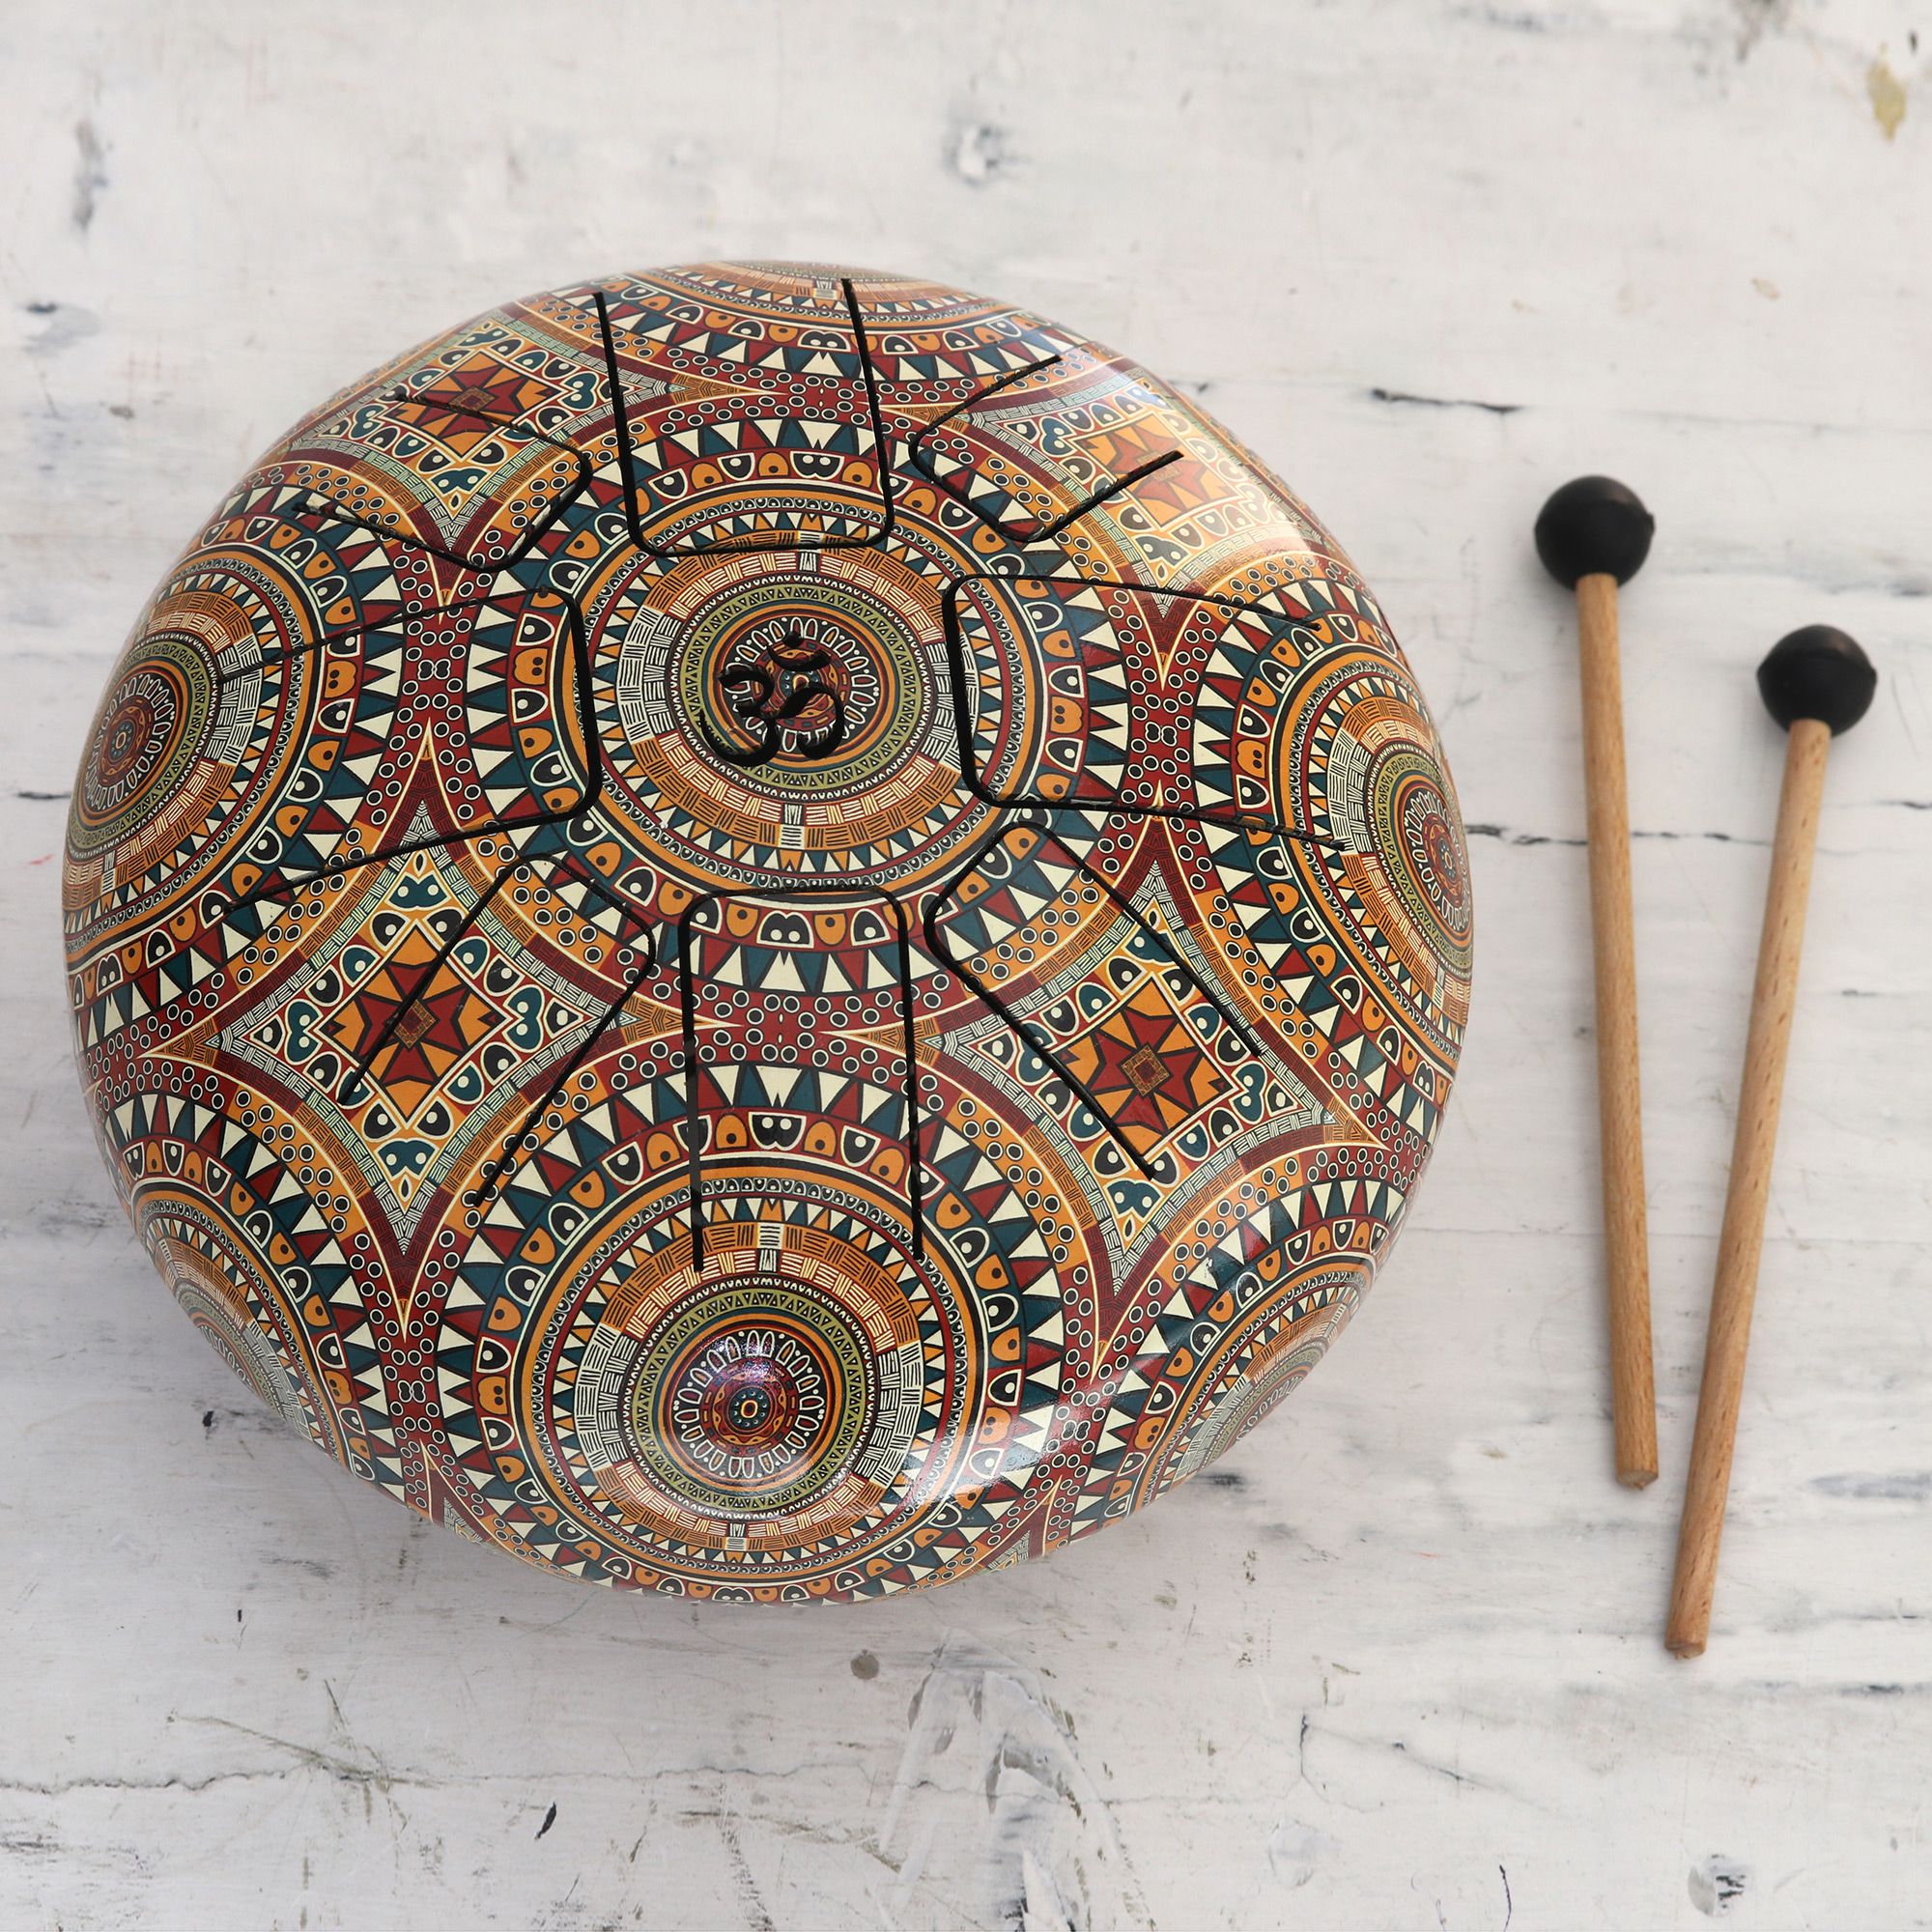 Patterned Iron Tongue Drum with Mango Wood Drumsticks, 'Palatial Peace